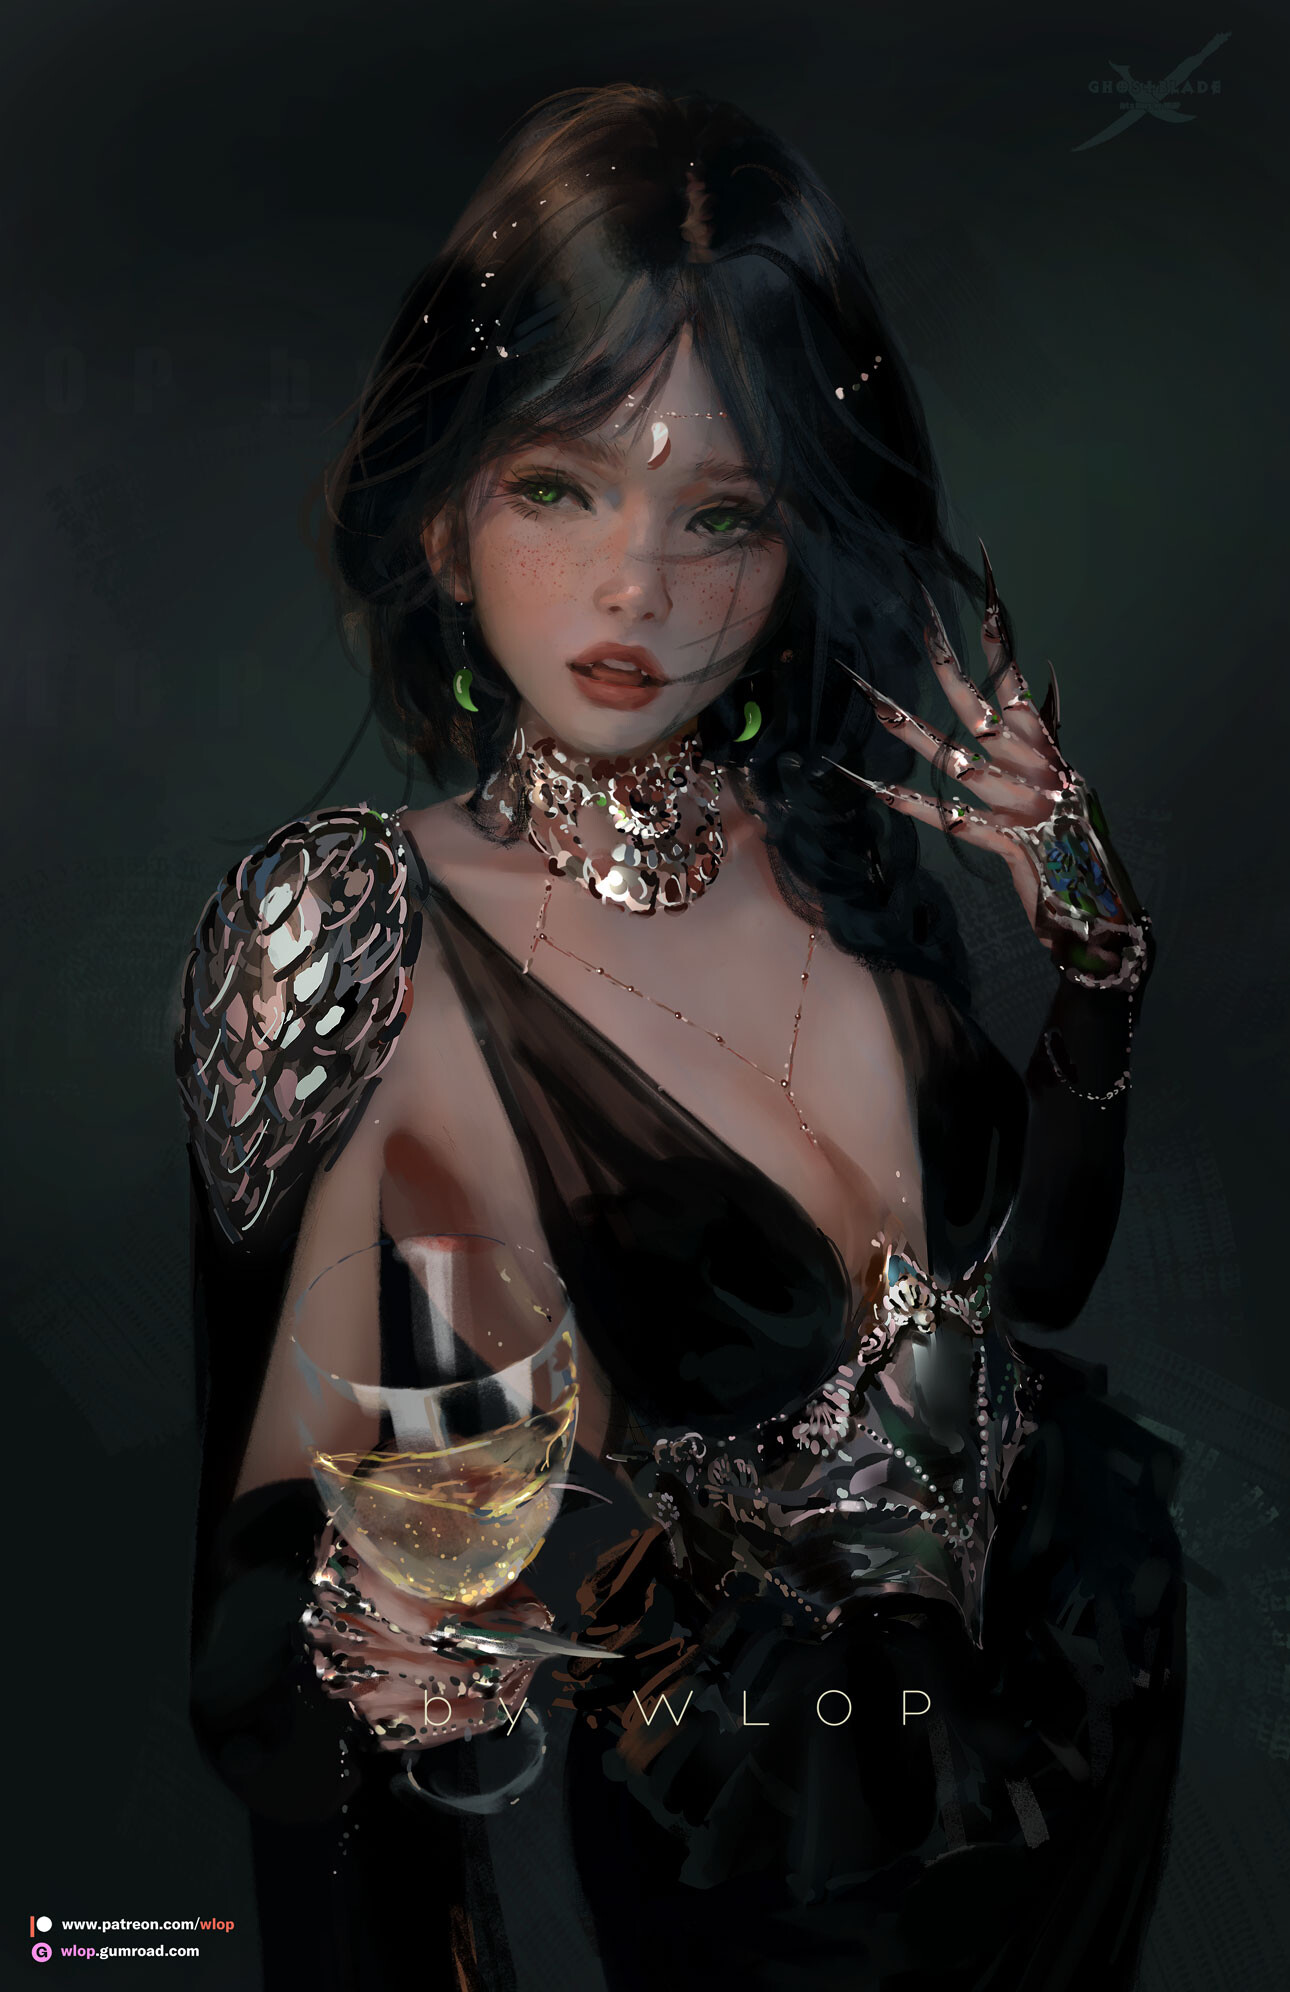 WLOP Drawing Women Dark Hair Green Eyes Dress Black Clothing Champagne Jewelry Simple Background Ver 1290x1992